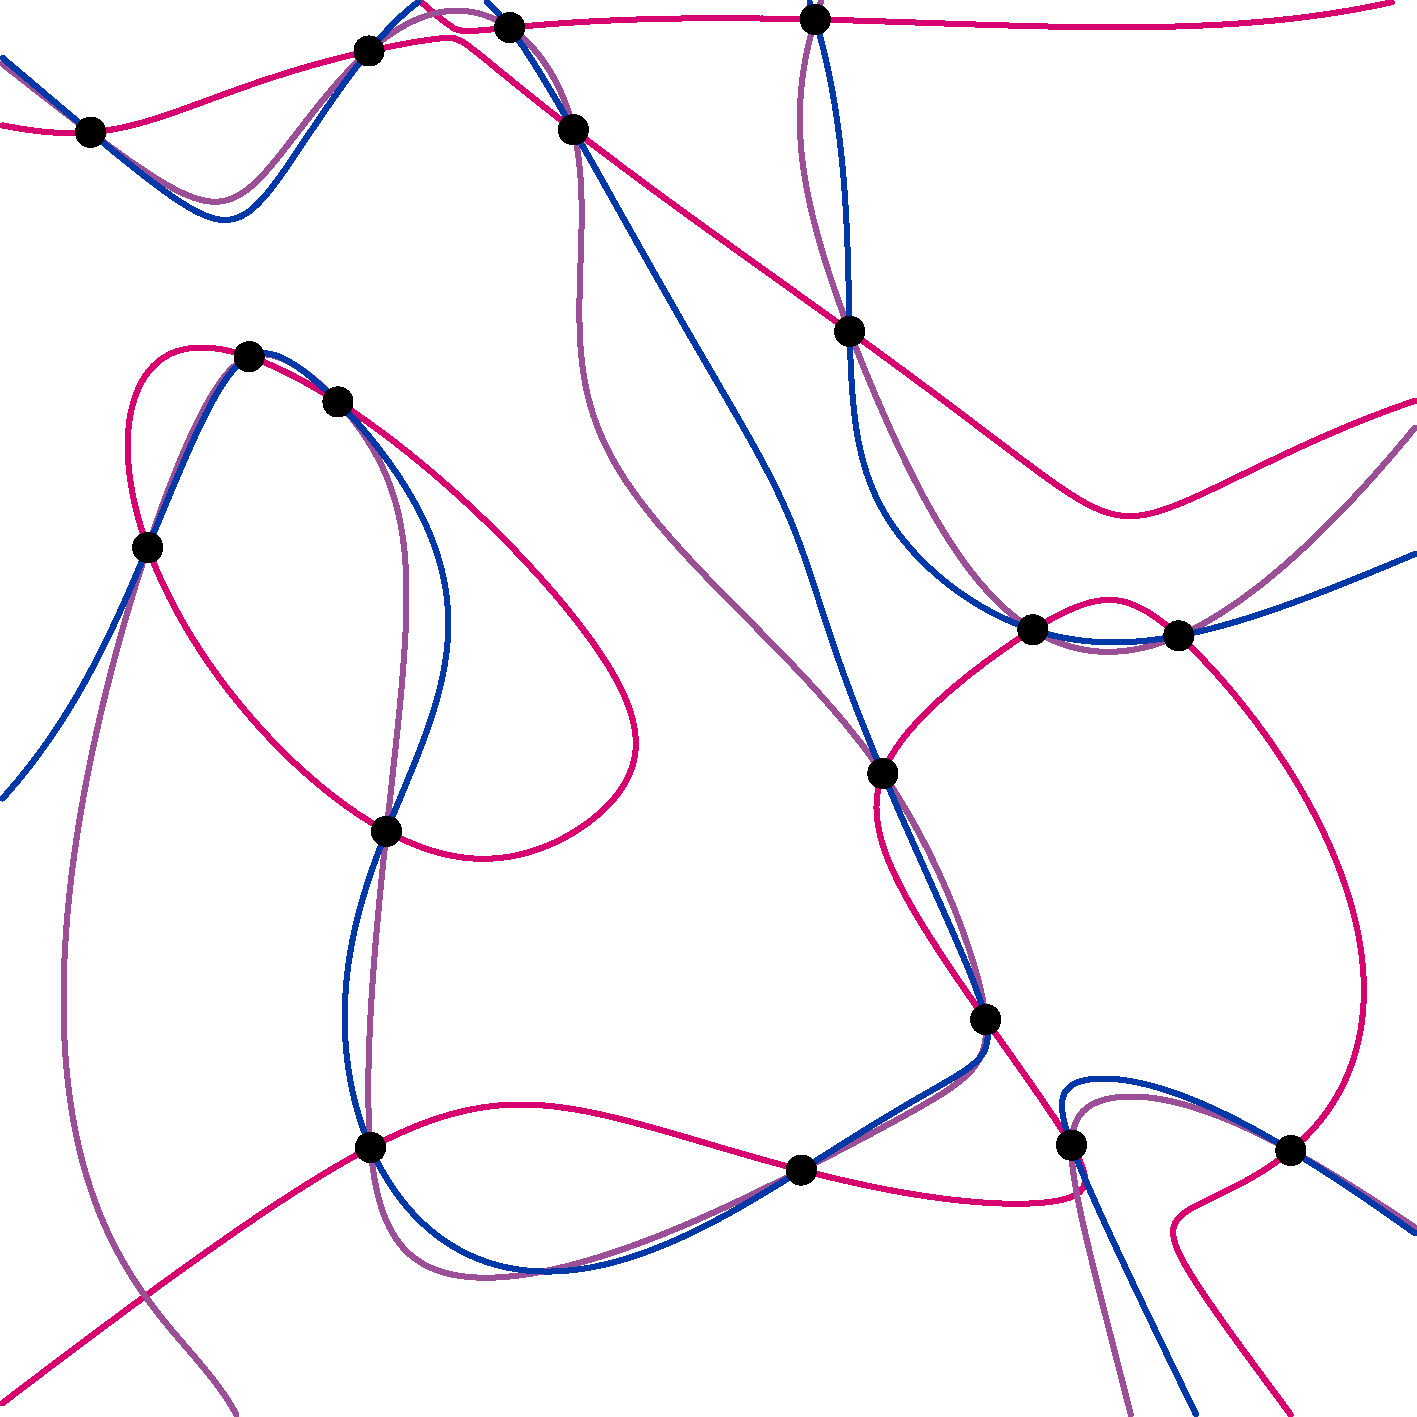 A rendering of three linearly independent quintics passing through 18 general points in the real plane.